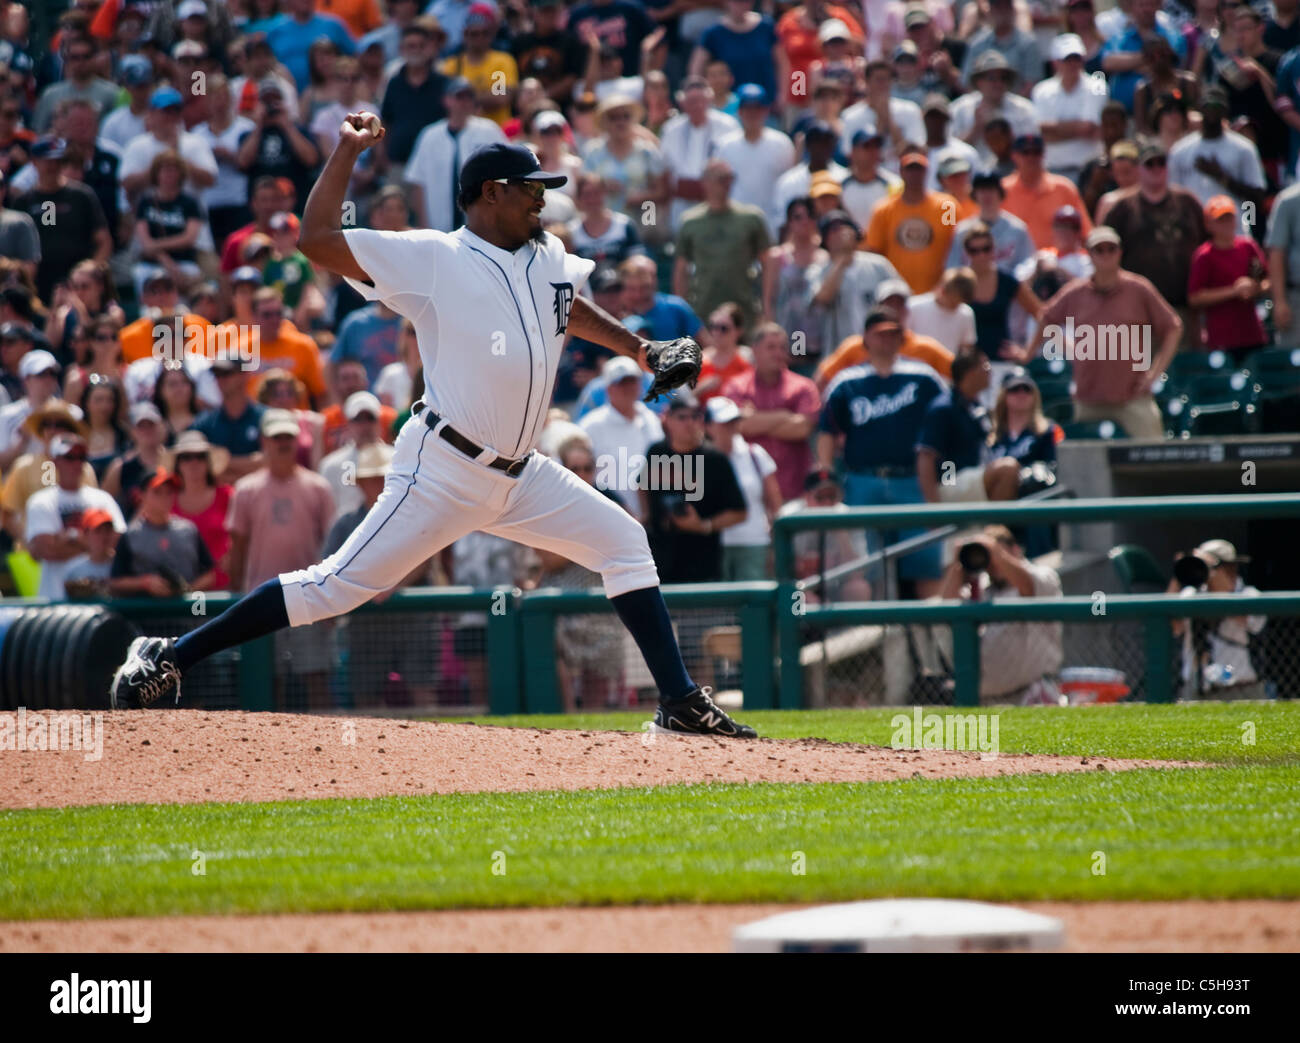 Jose Valverde Detroit Tigers Pitcher making the last pitch in the game against the San Francisco Giants Stock Photo